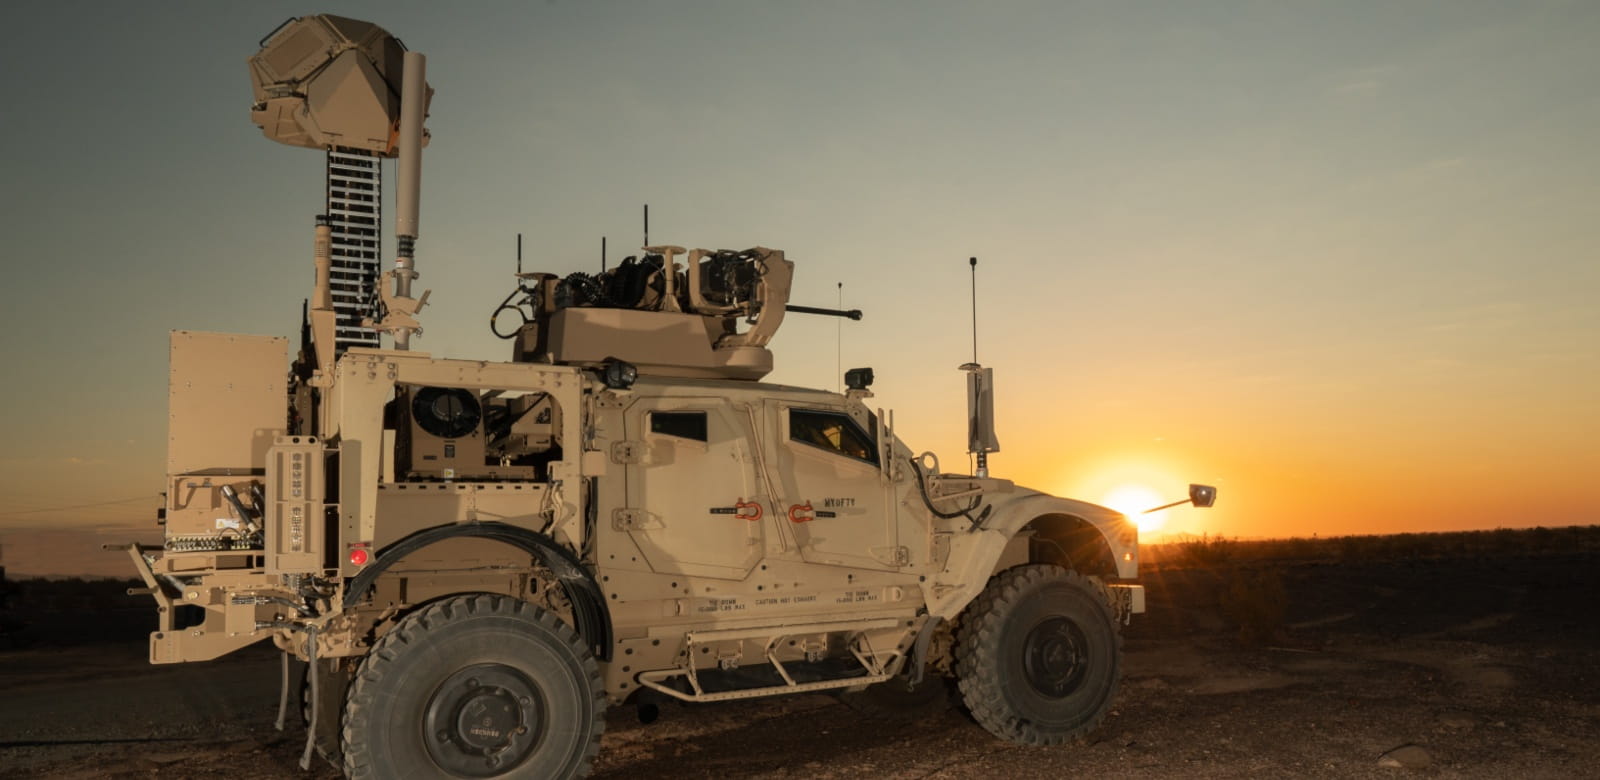 The Ku-720 mobile sensing radar and Coyote effectors were used to detect and defeat enemy drones in a 2022 test at the U.S. Army Yuma Proving Ground in Arizona.